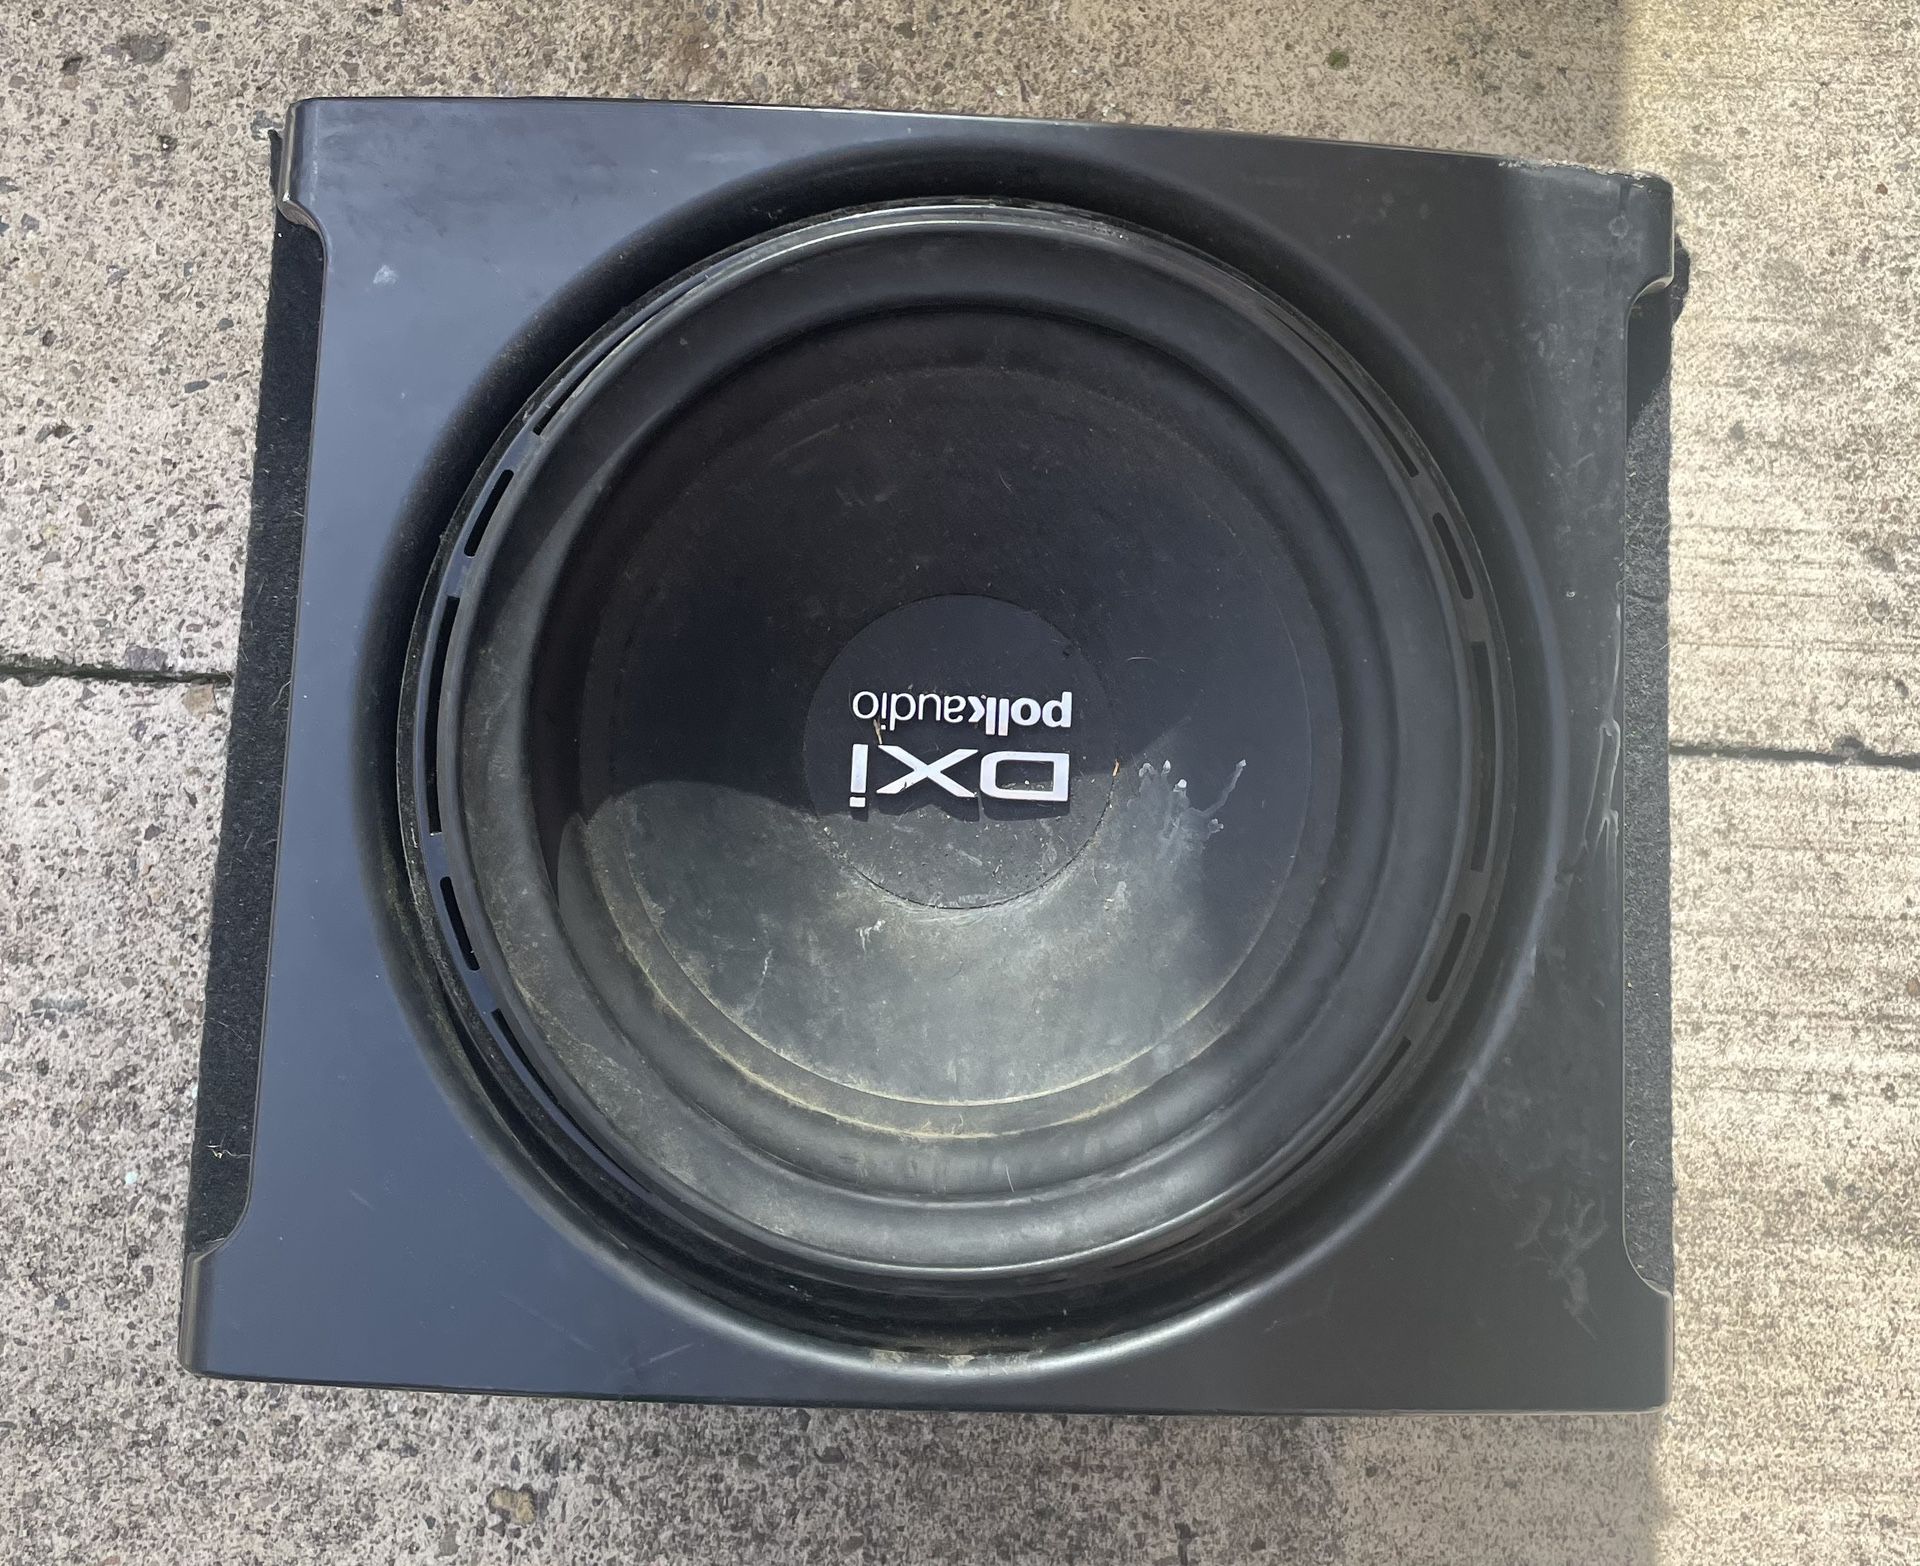 The Polk Audio DXi car speaker is a ventilated subwoofer with two coils. In good working condition. I don't mail it.